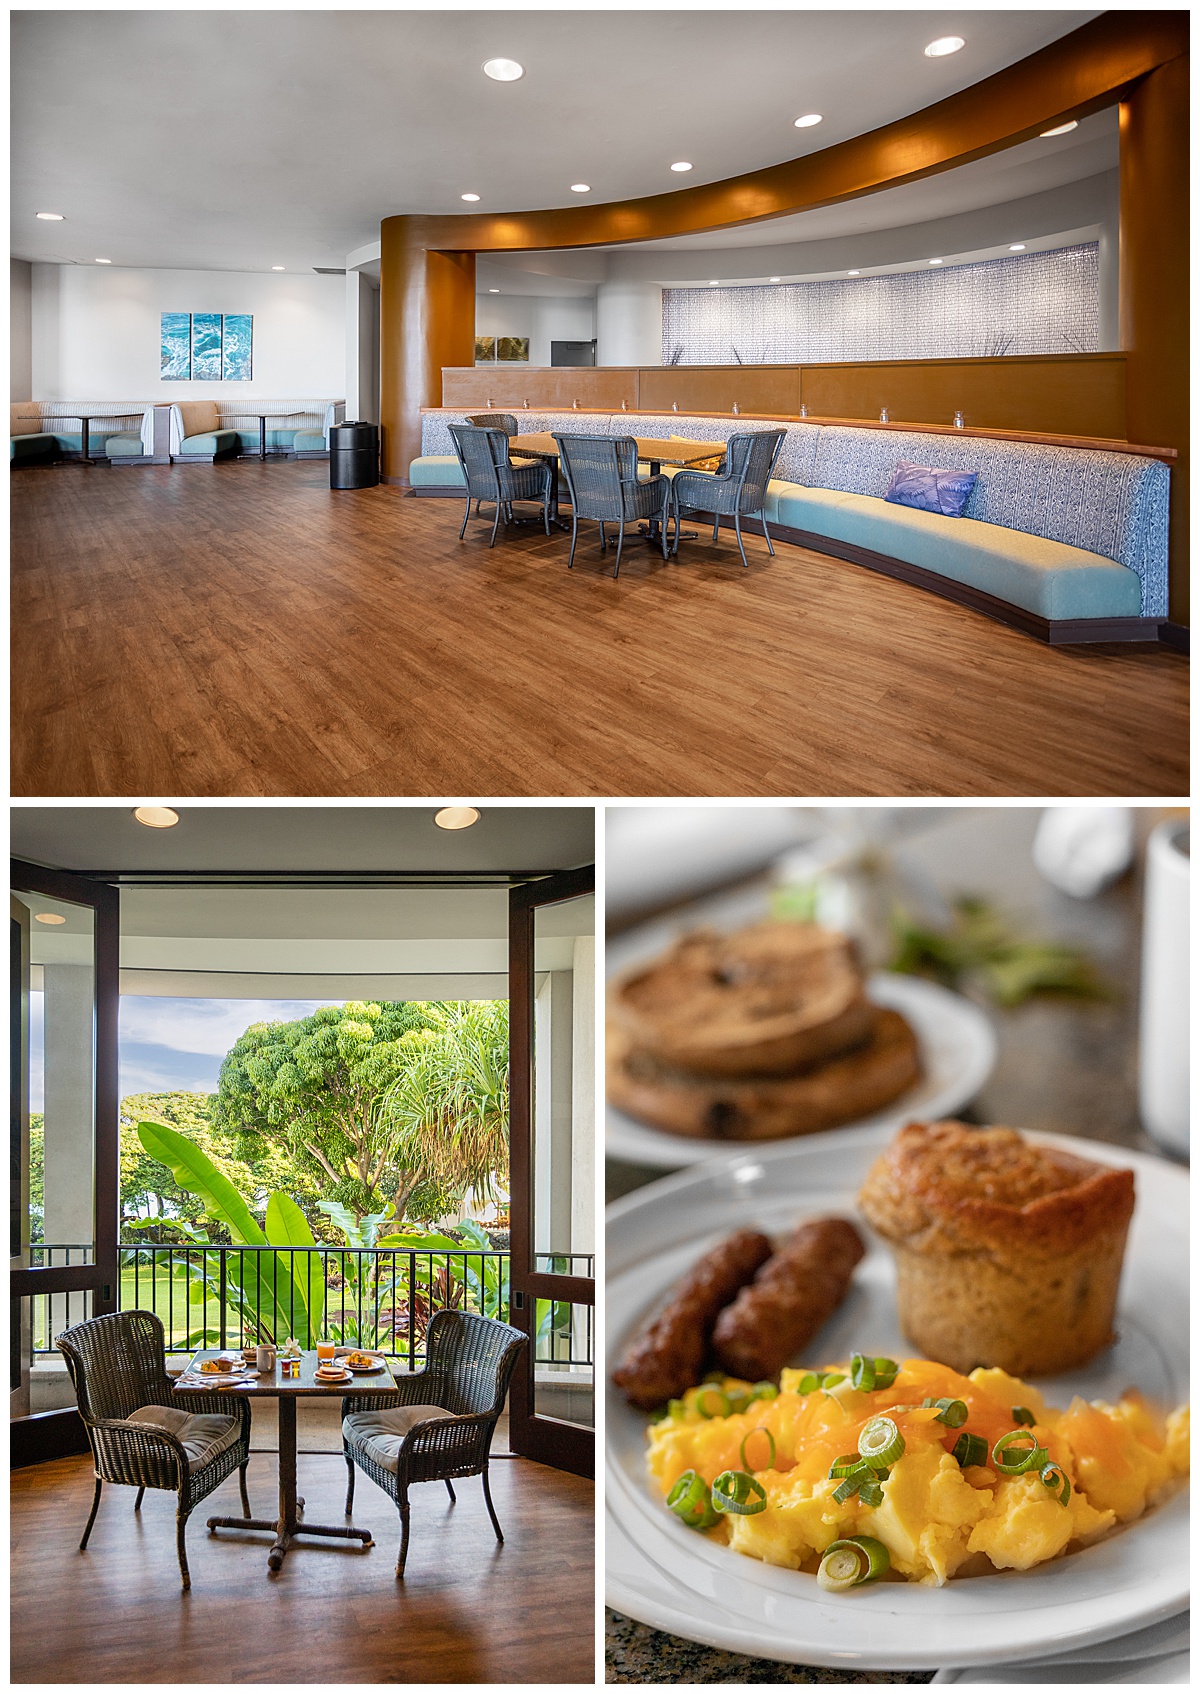 The Voyager 47 lounge at the Outrigger Kona Resort. There is a buffet with snacks, and tables and booths to sit and eat.